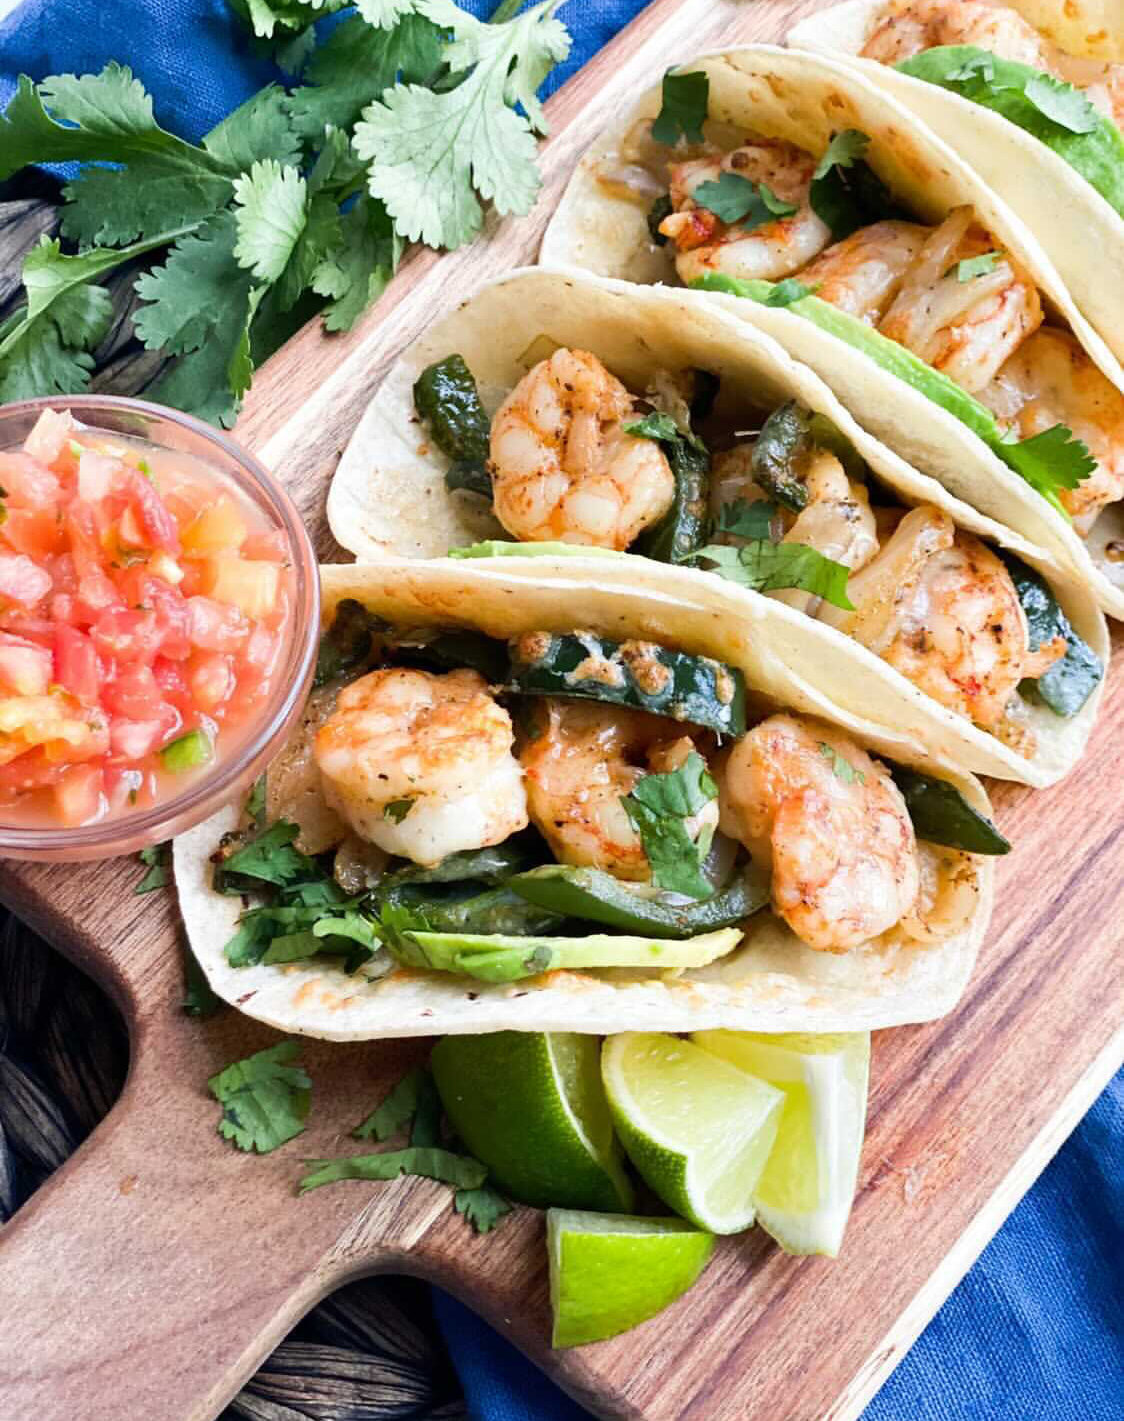 Valentines Day Dinner of shrimp tacos with poblanos, limes, salsa and cilantro